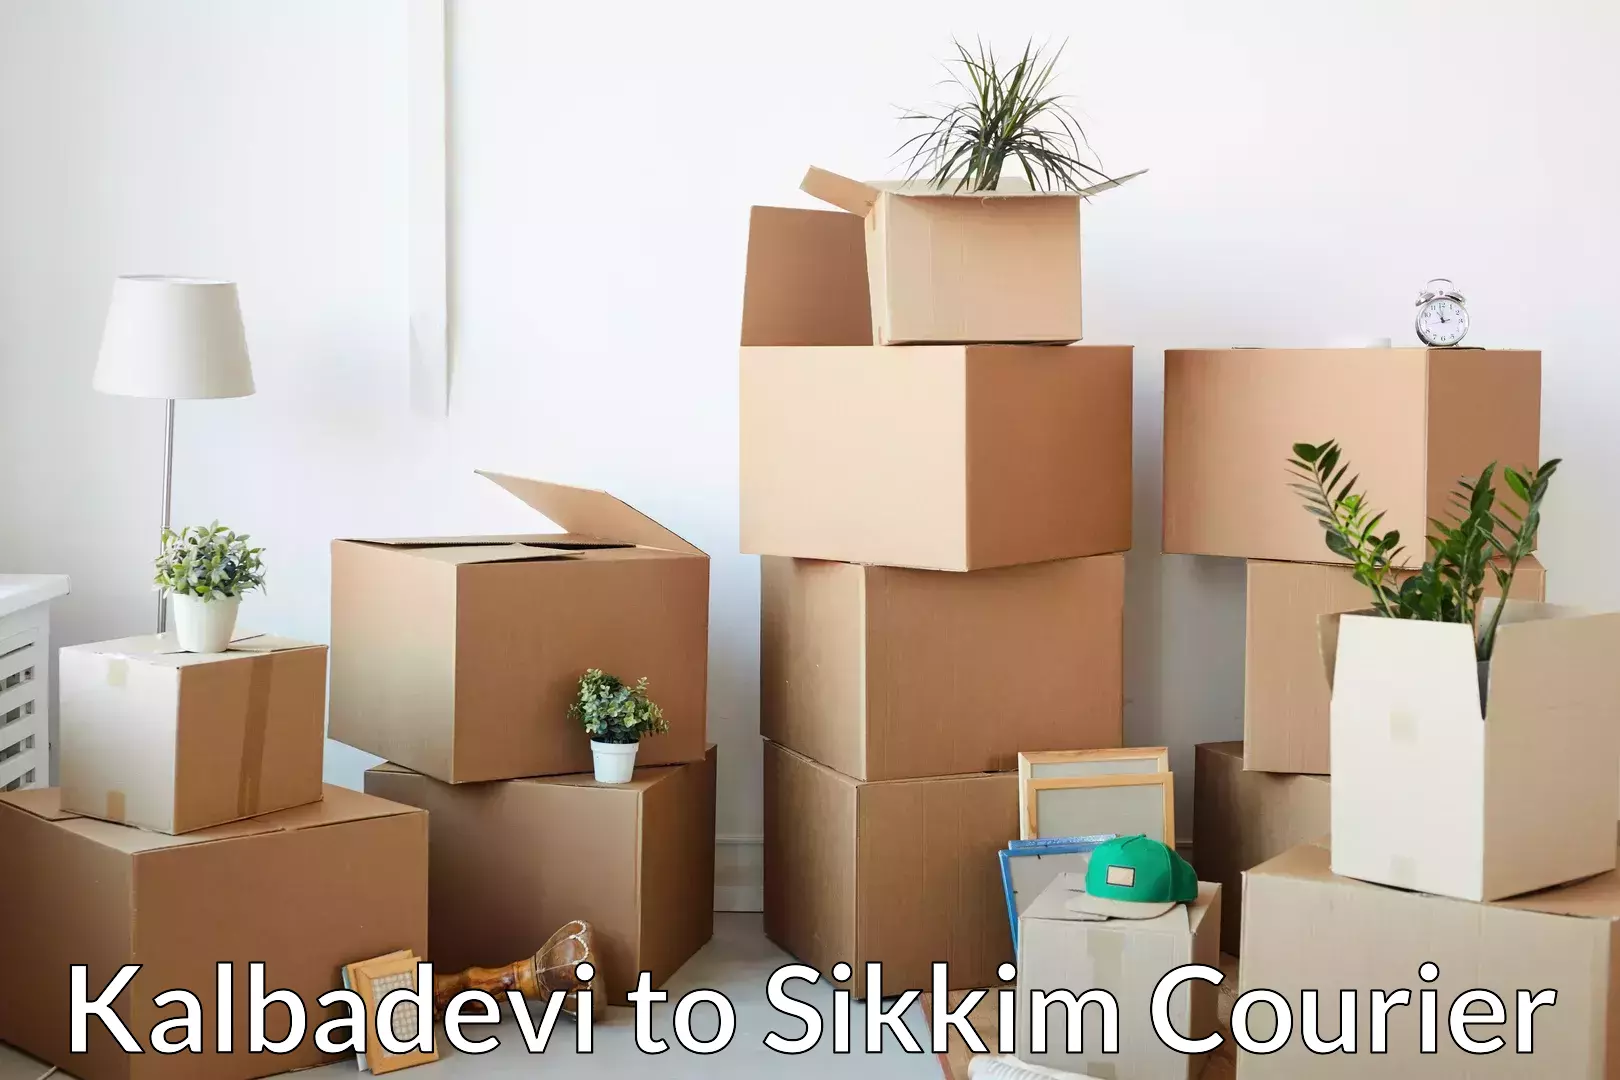 Furniture delivery service Kalbadevi to East Sikkim